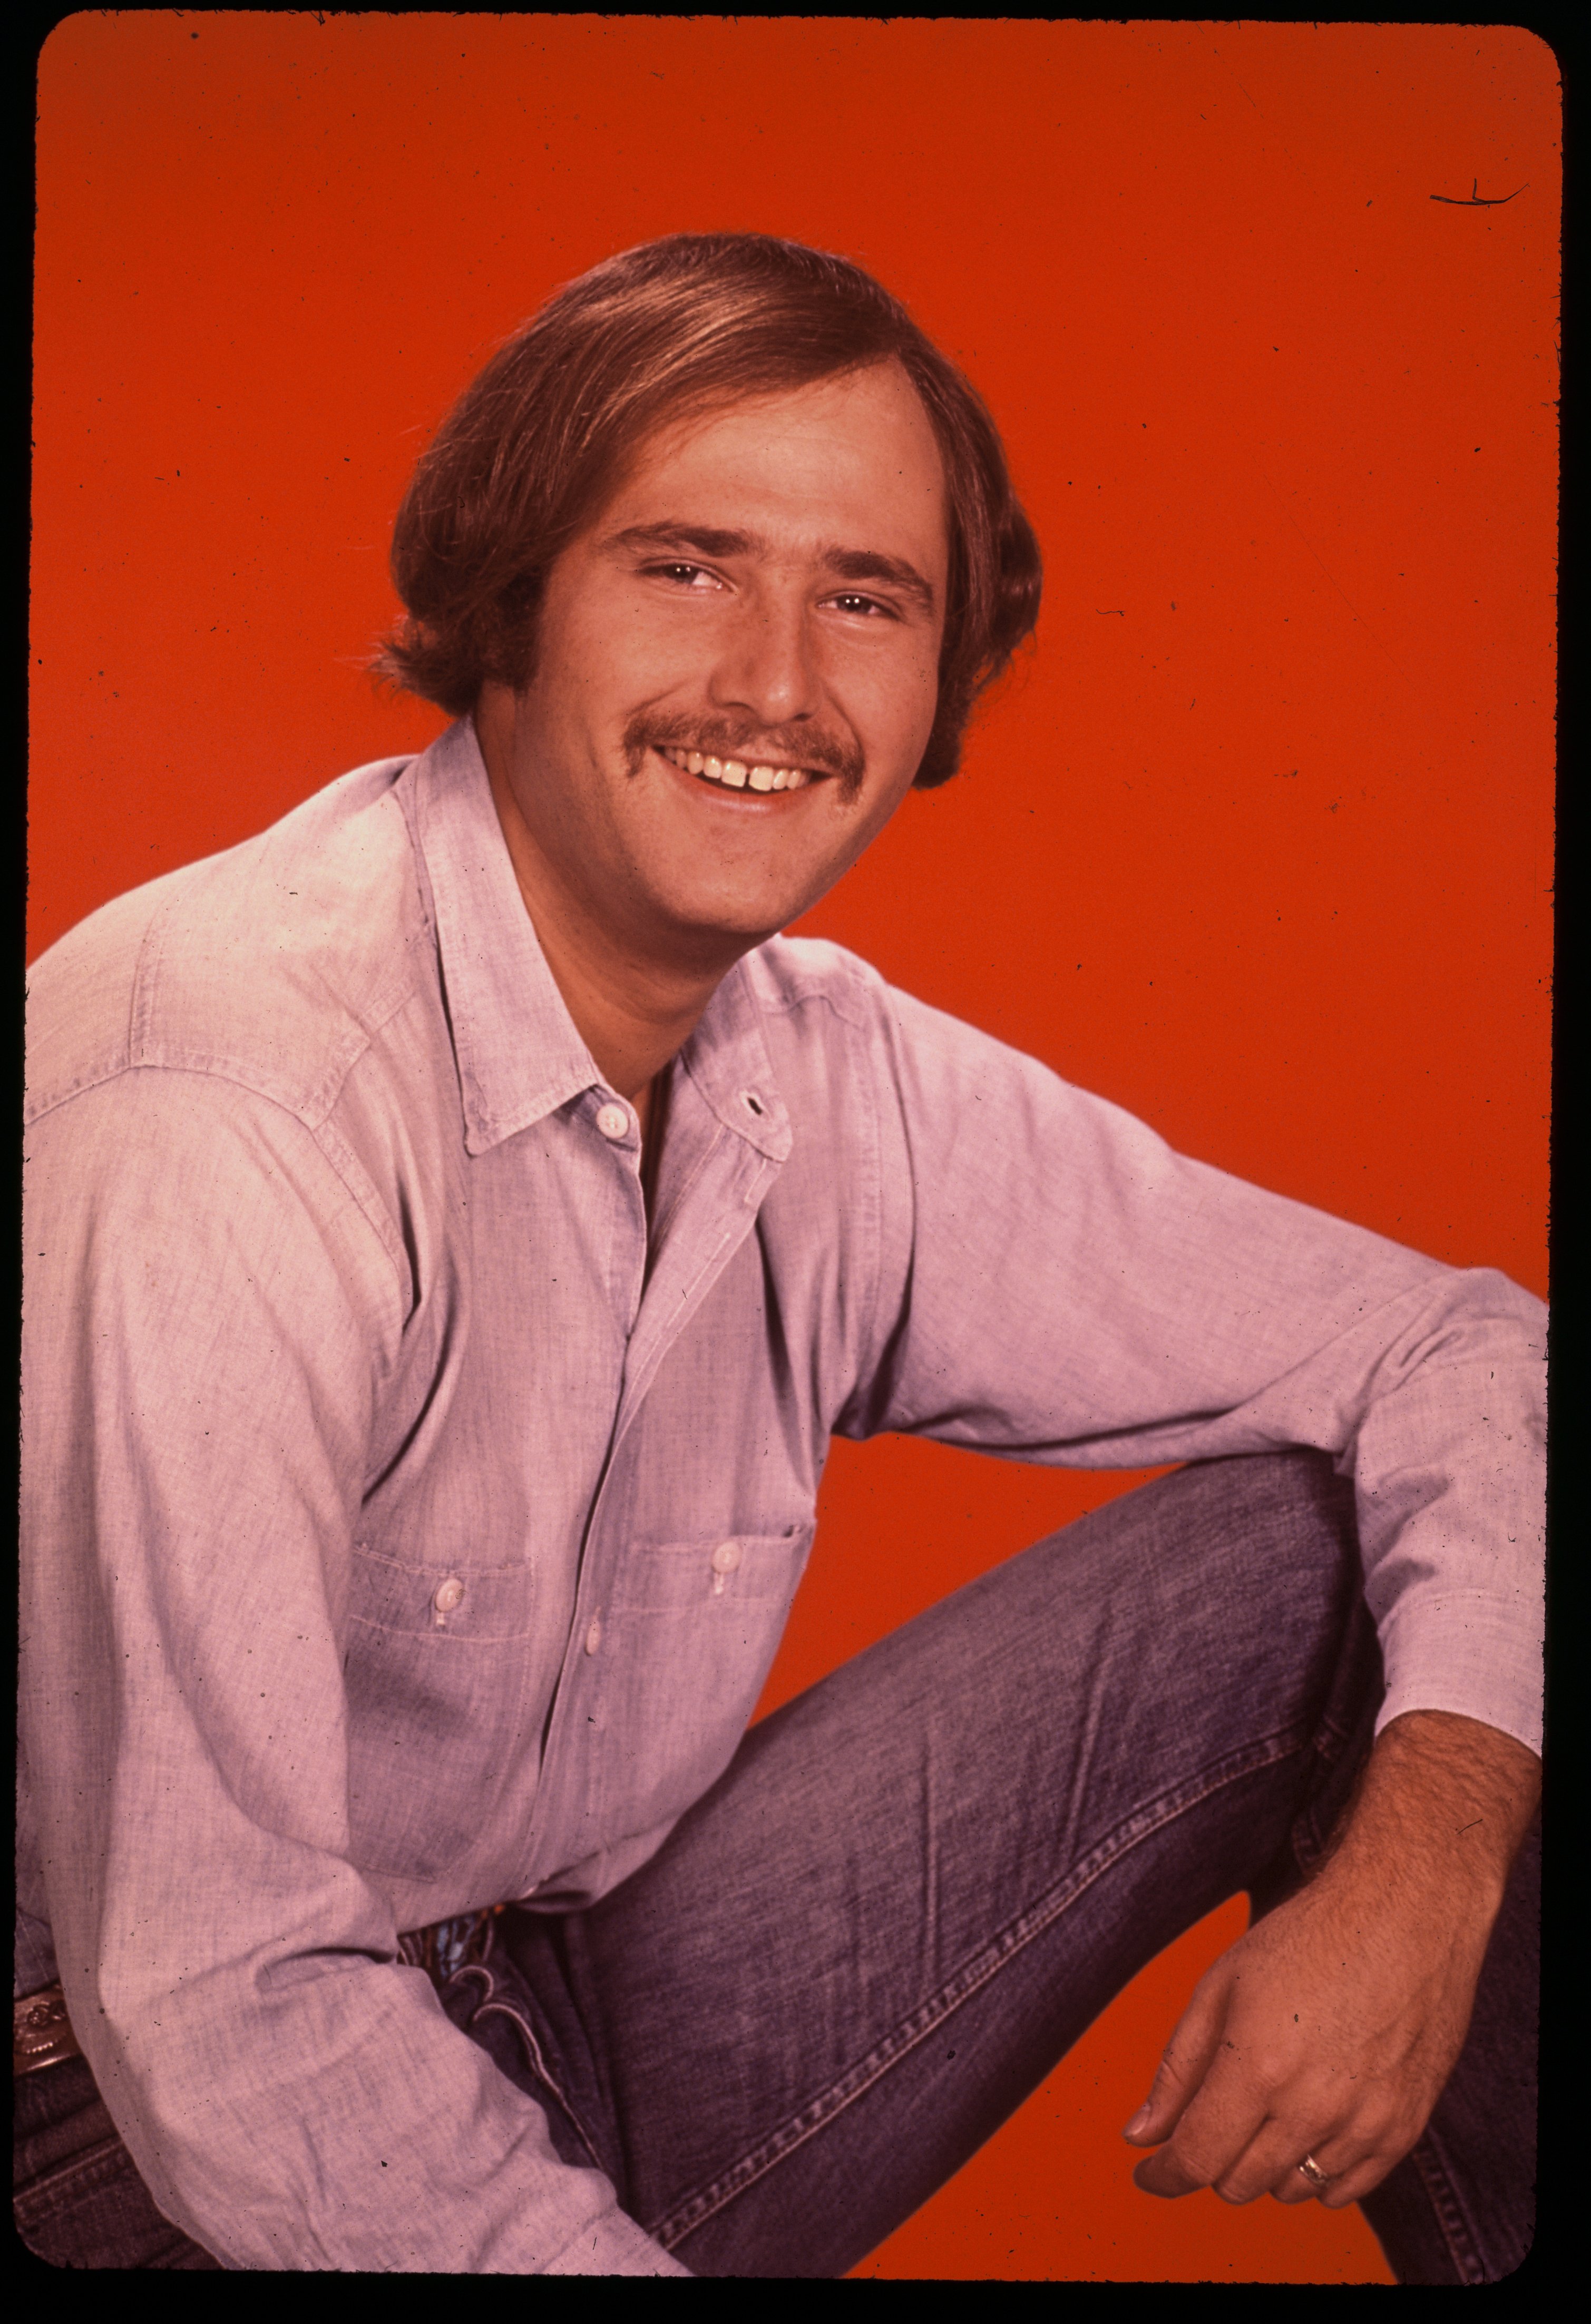 Actor Rob Reiner from the TV show, "All in the Family" | Source: Getty Images